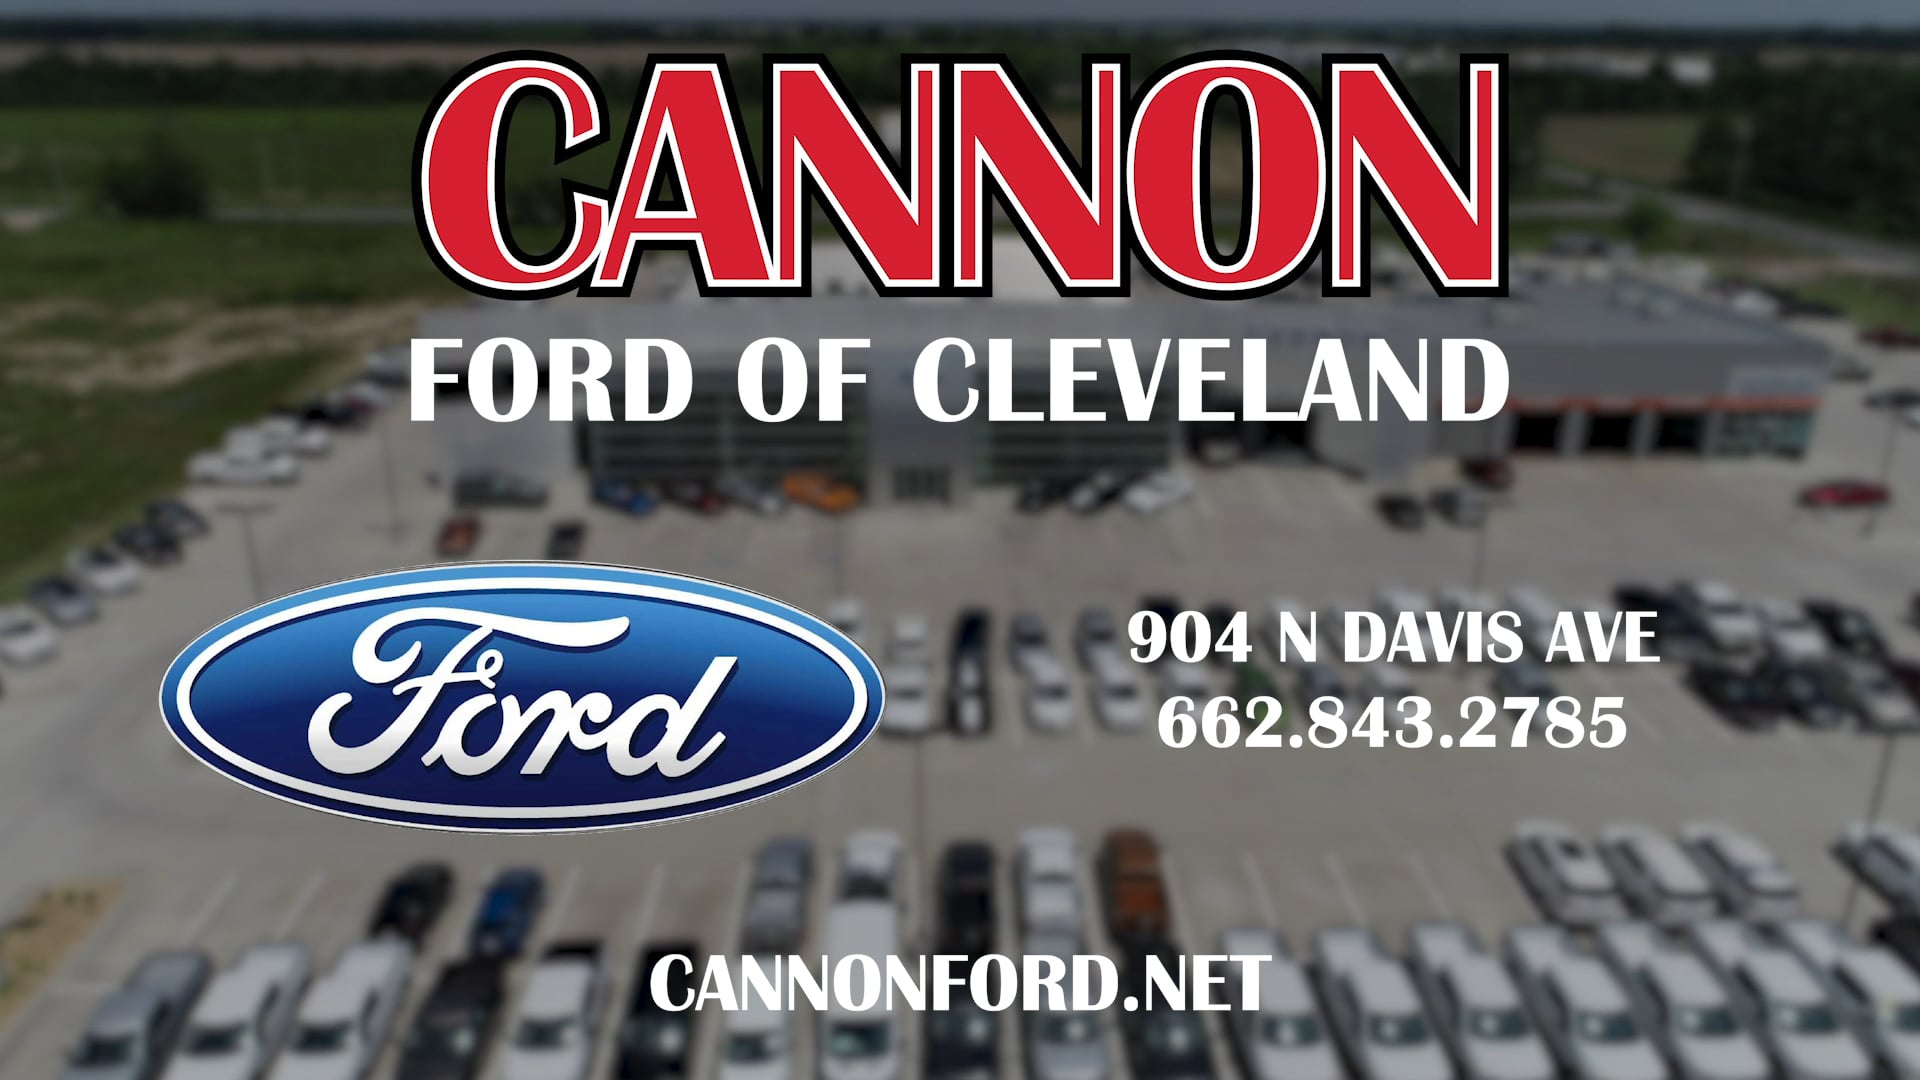 CANNON CLEVELAND FORD: TV SPOT